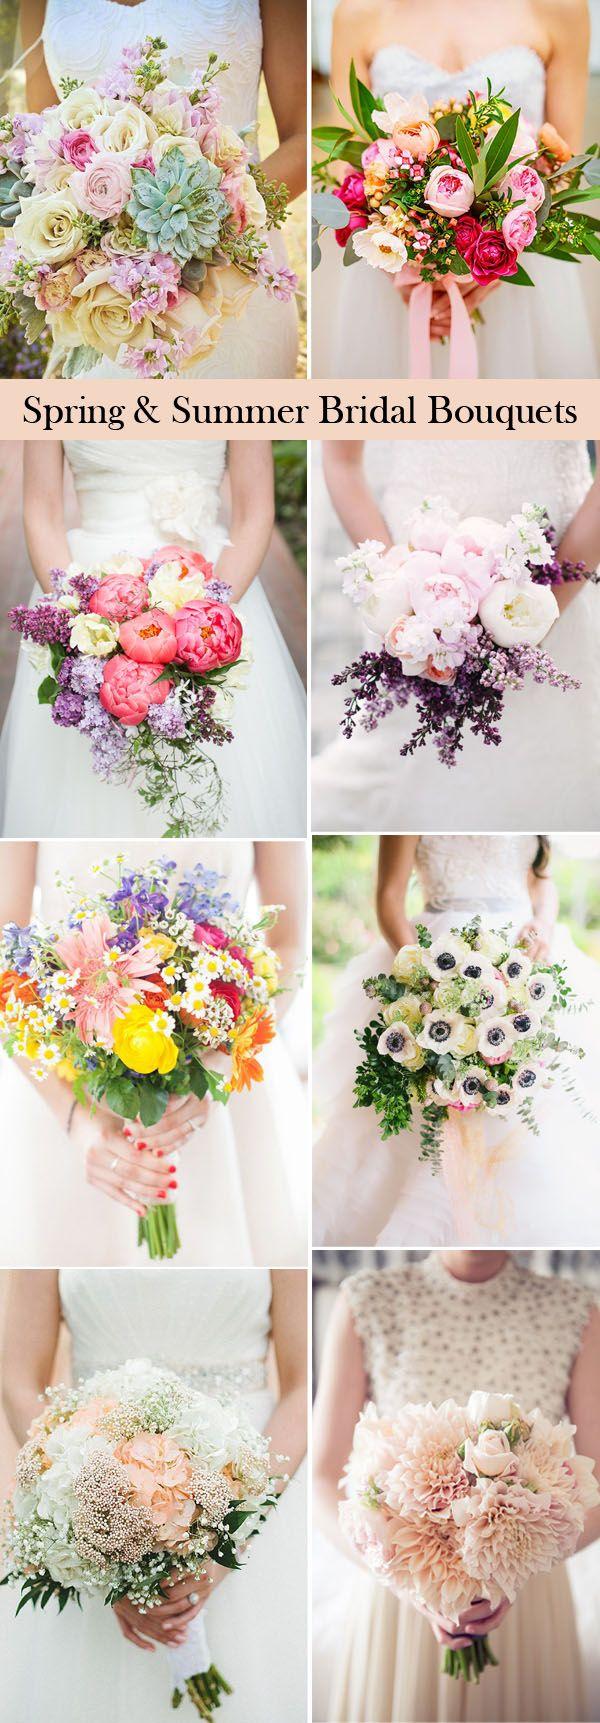 Mariage - 25 Swoon Worthy Spring & Summer Wedding Bouquets